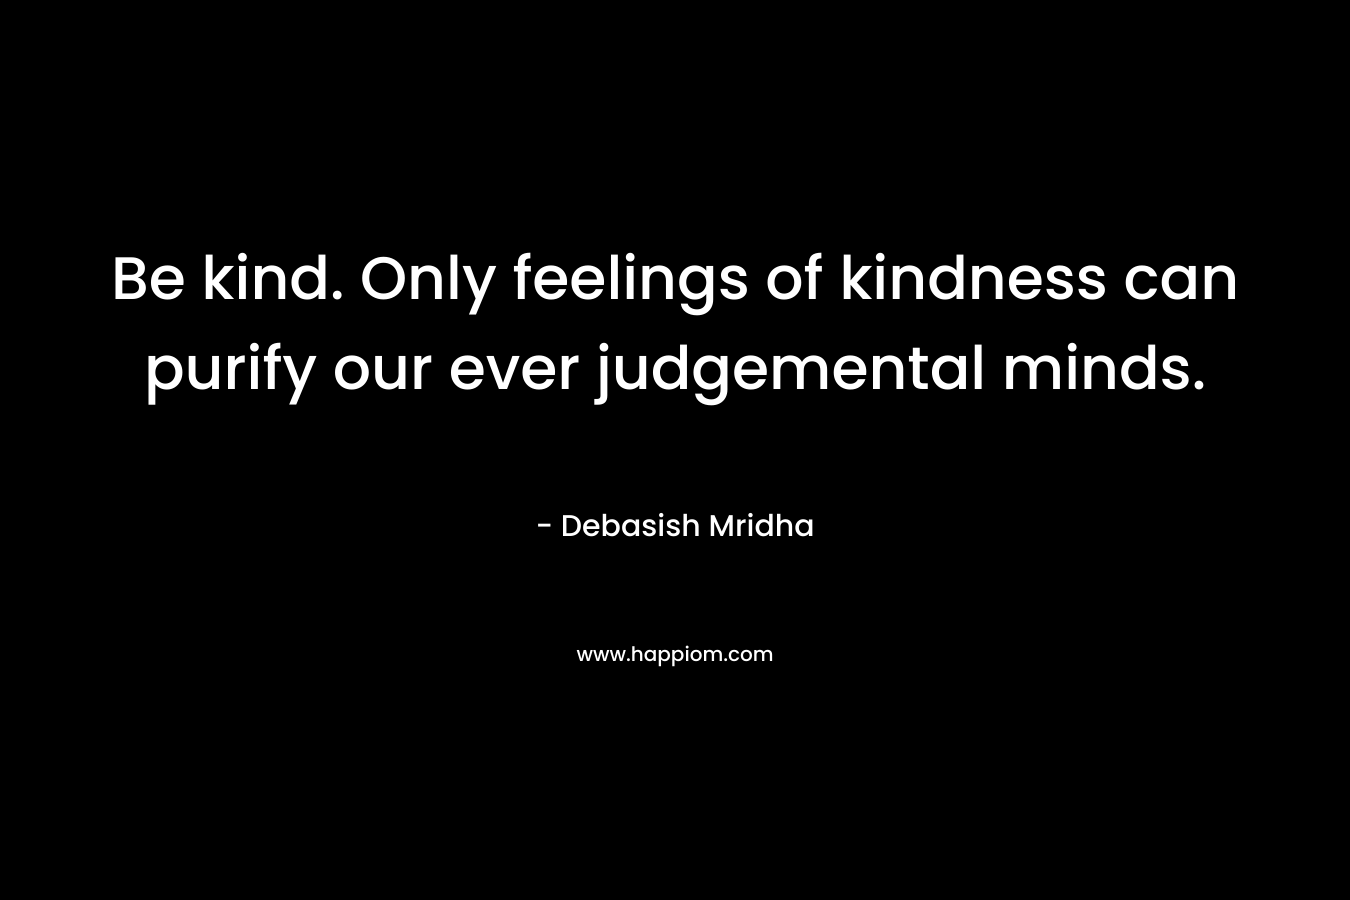 Be kind. Only feelings of kindness can purify our ever judgemental minds. – Debasish Mridha